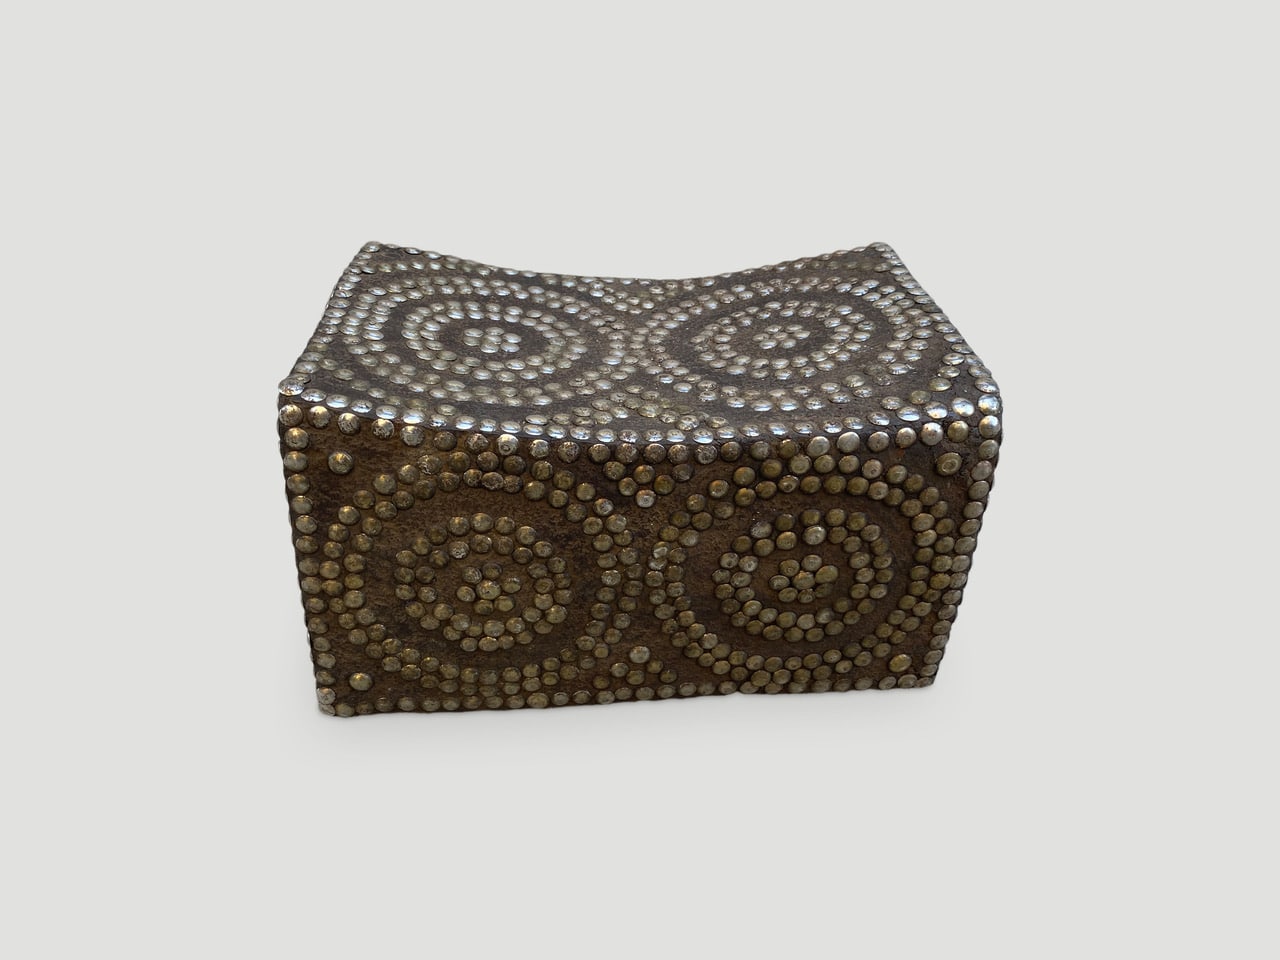 African Royalty Studded Stool